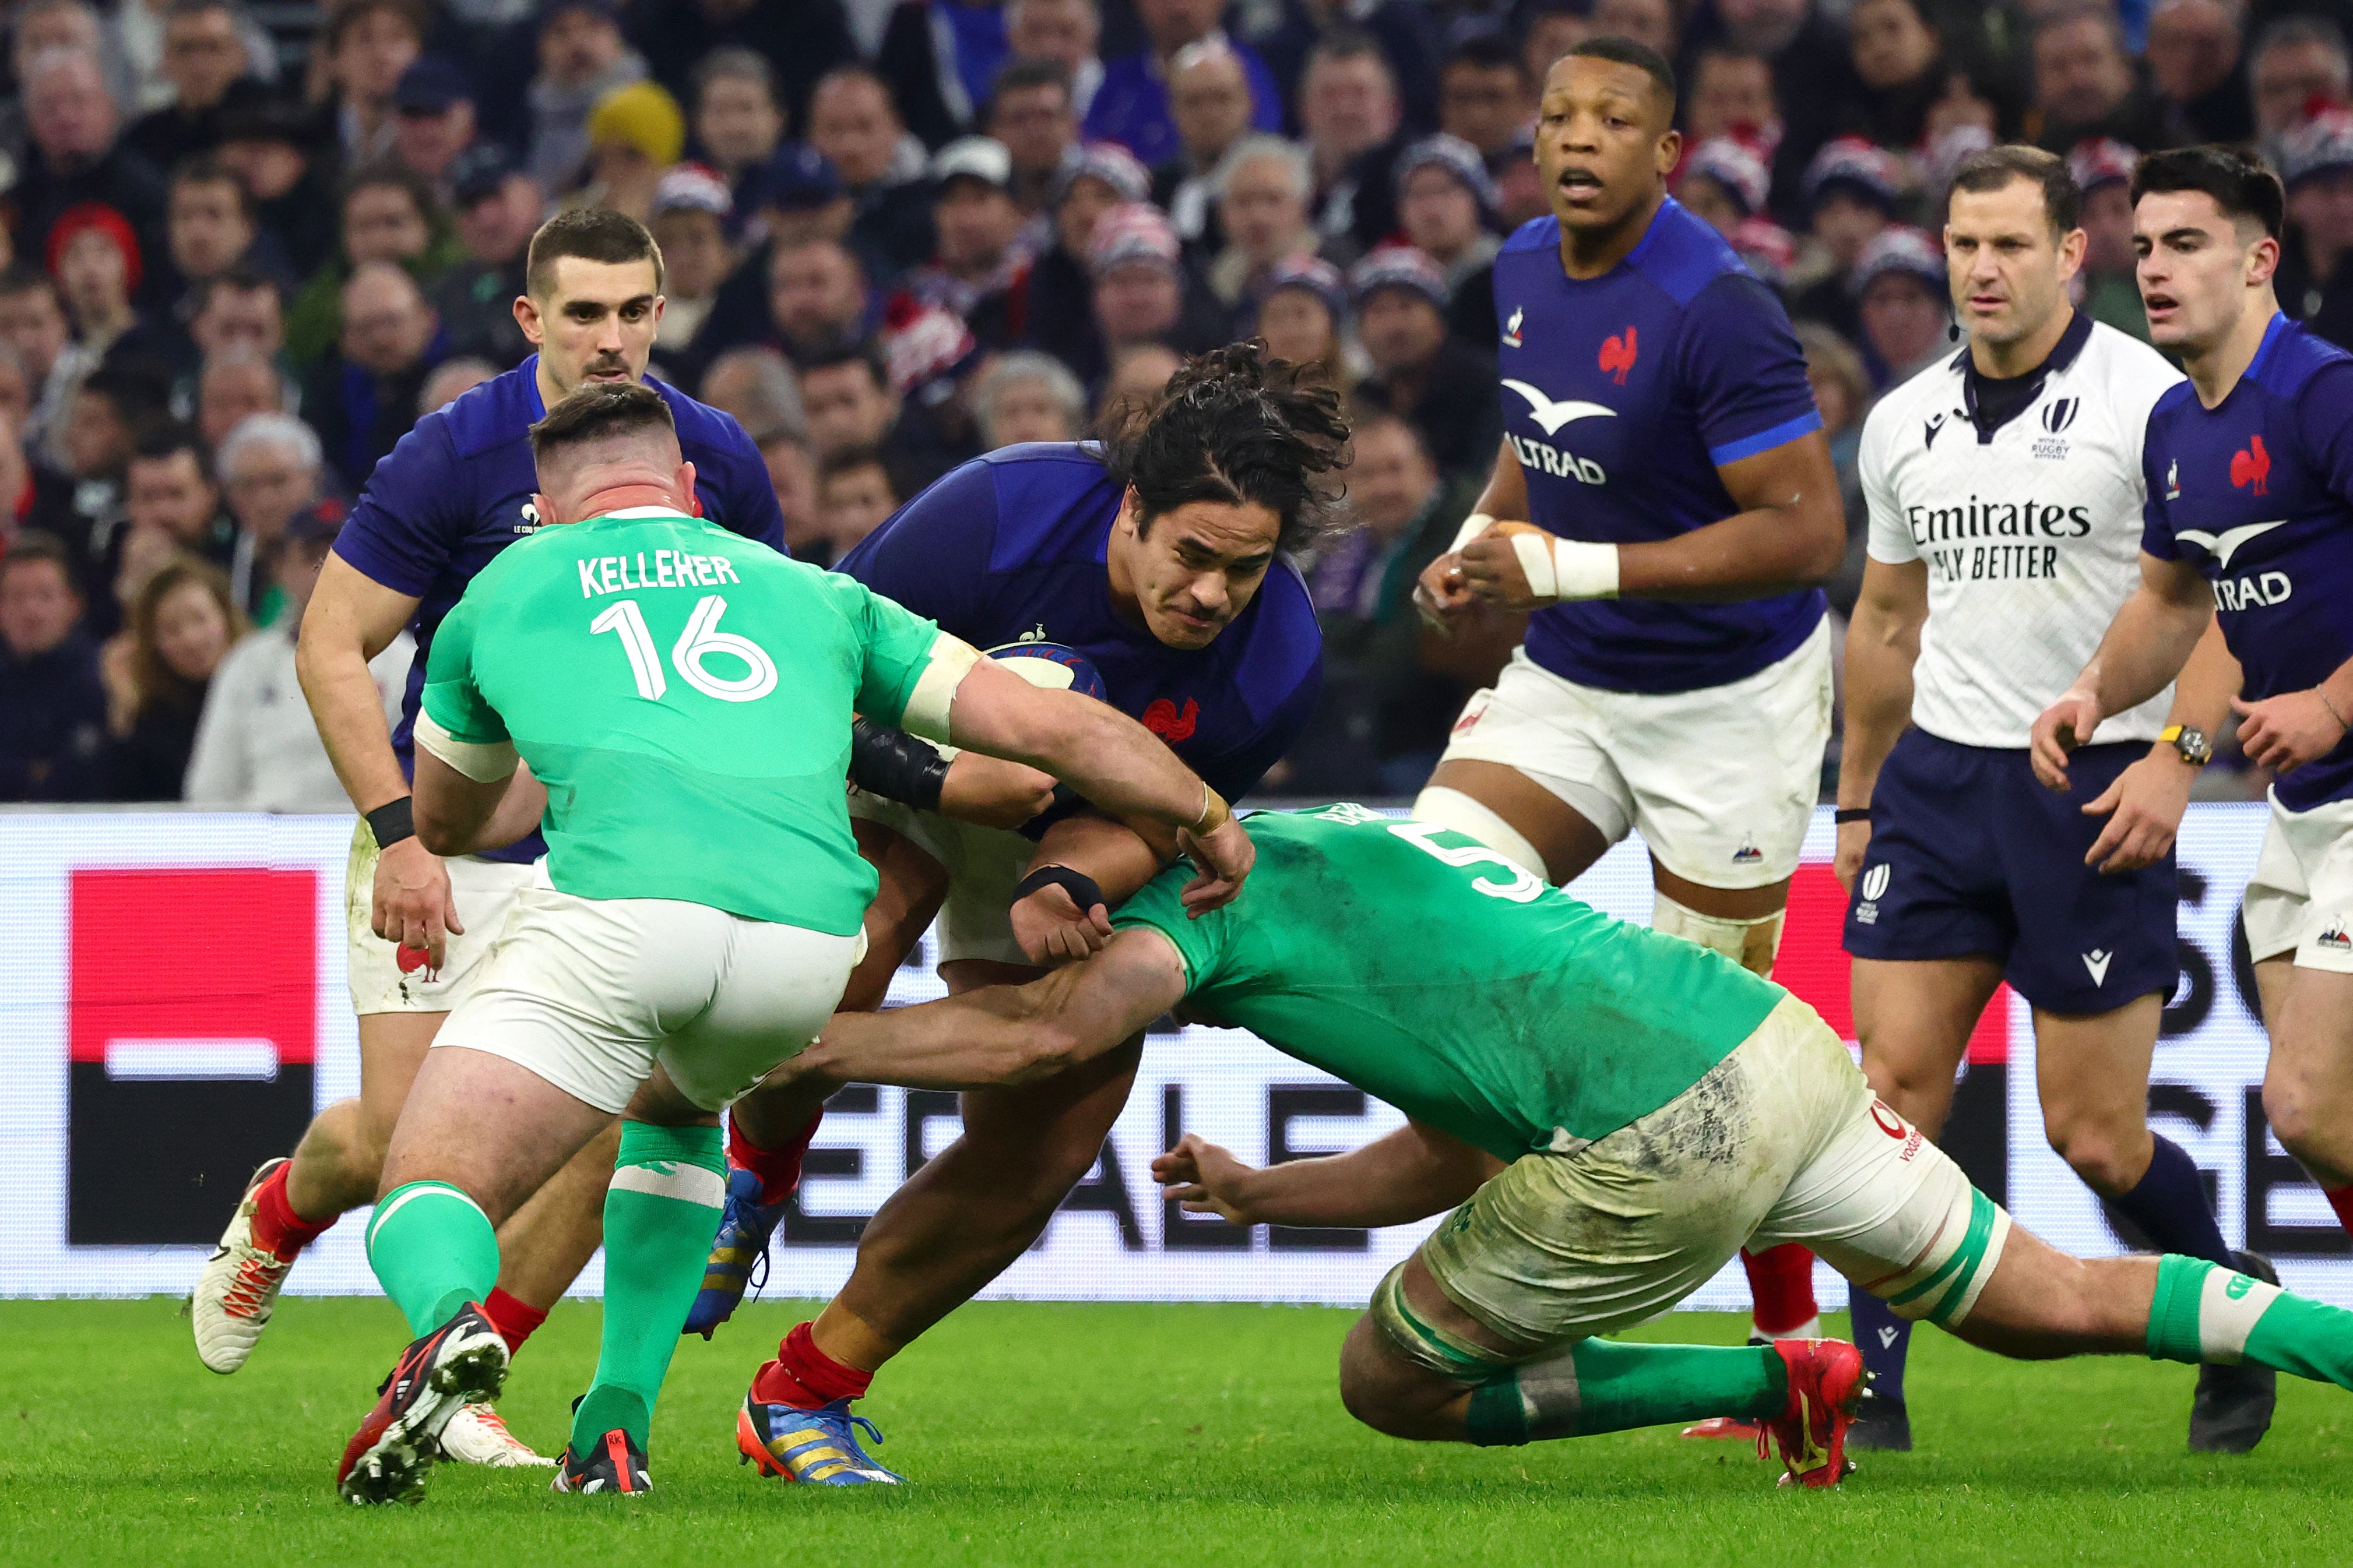 Posolo Tuilagi has come off the bech for the first two France games in this year’s Six Nations